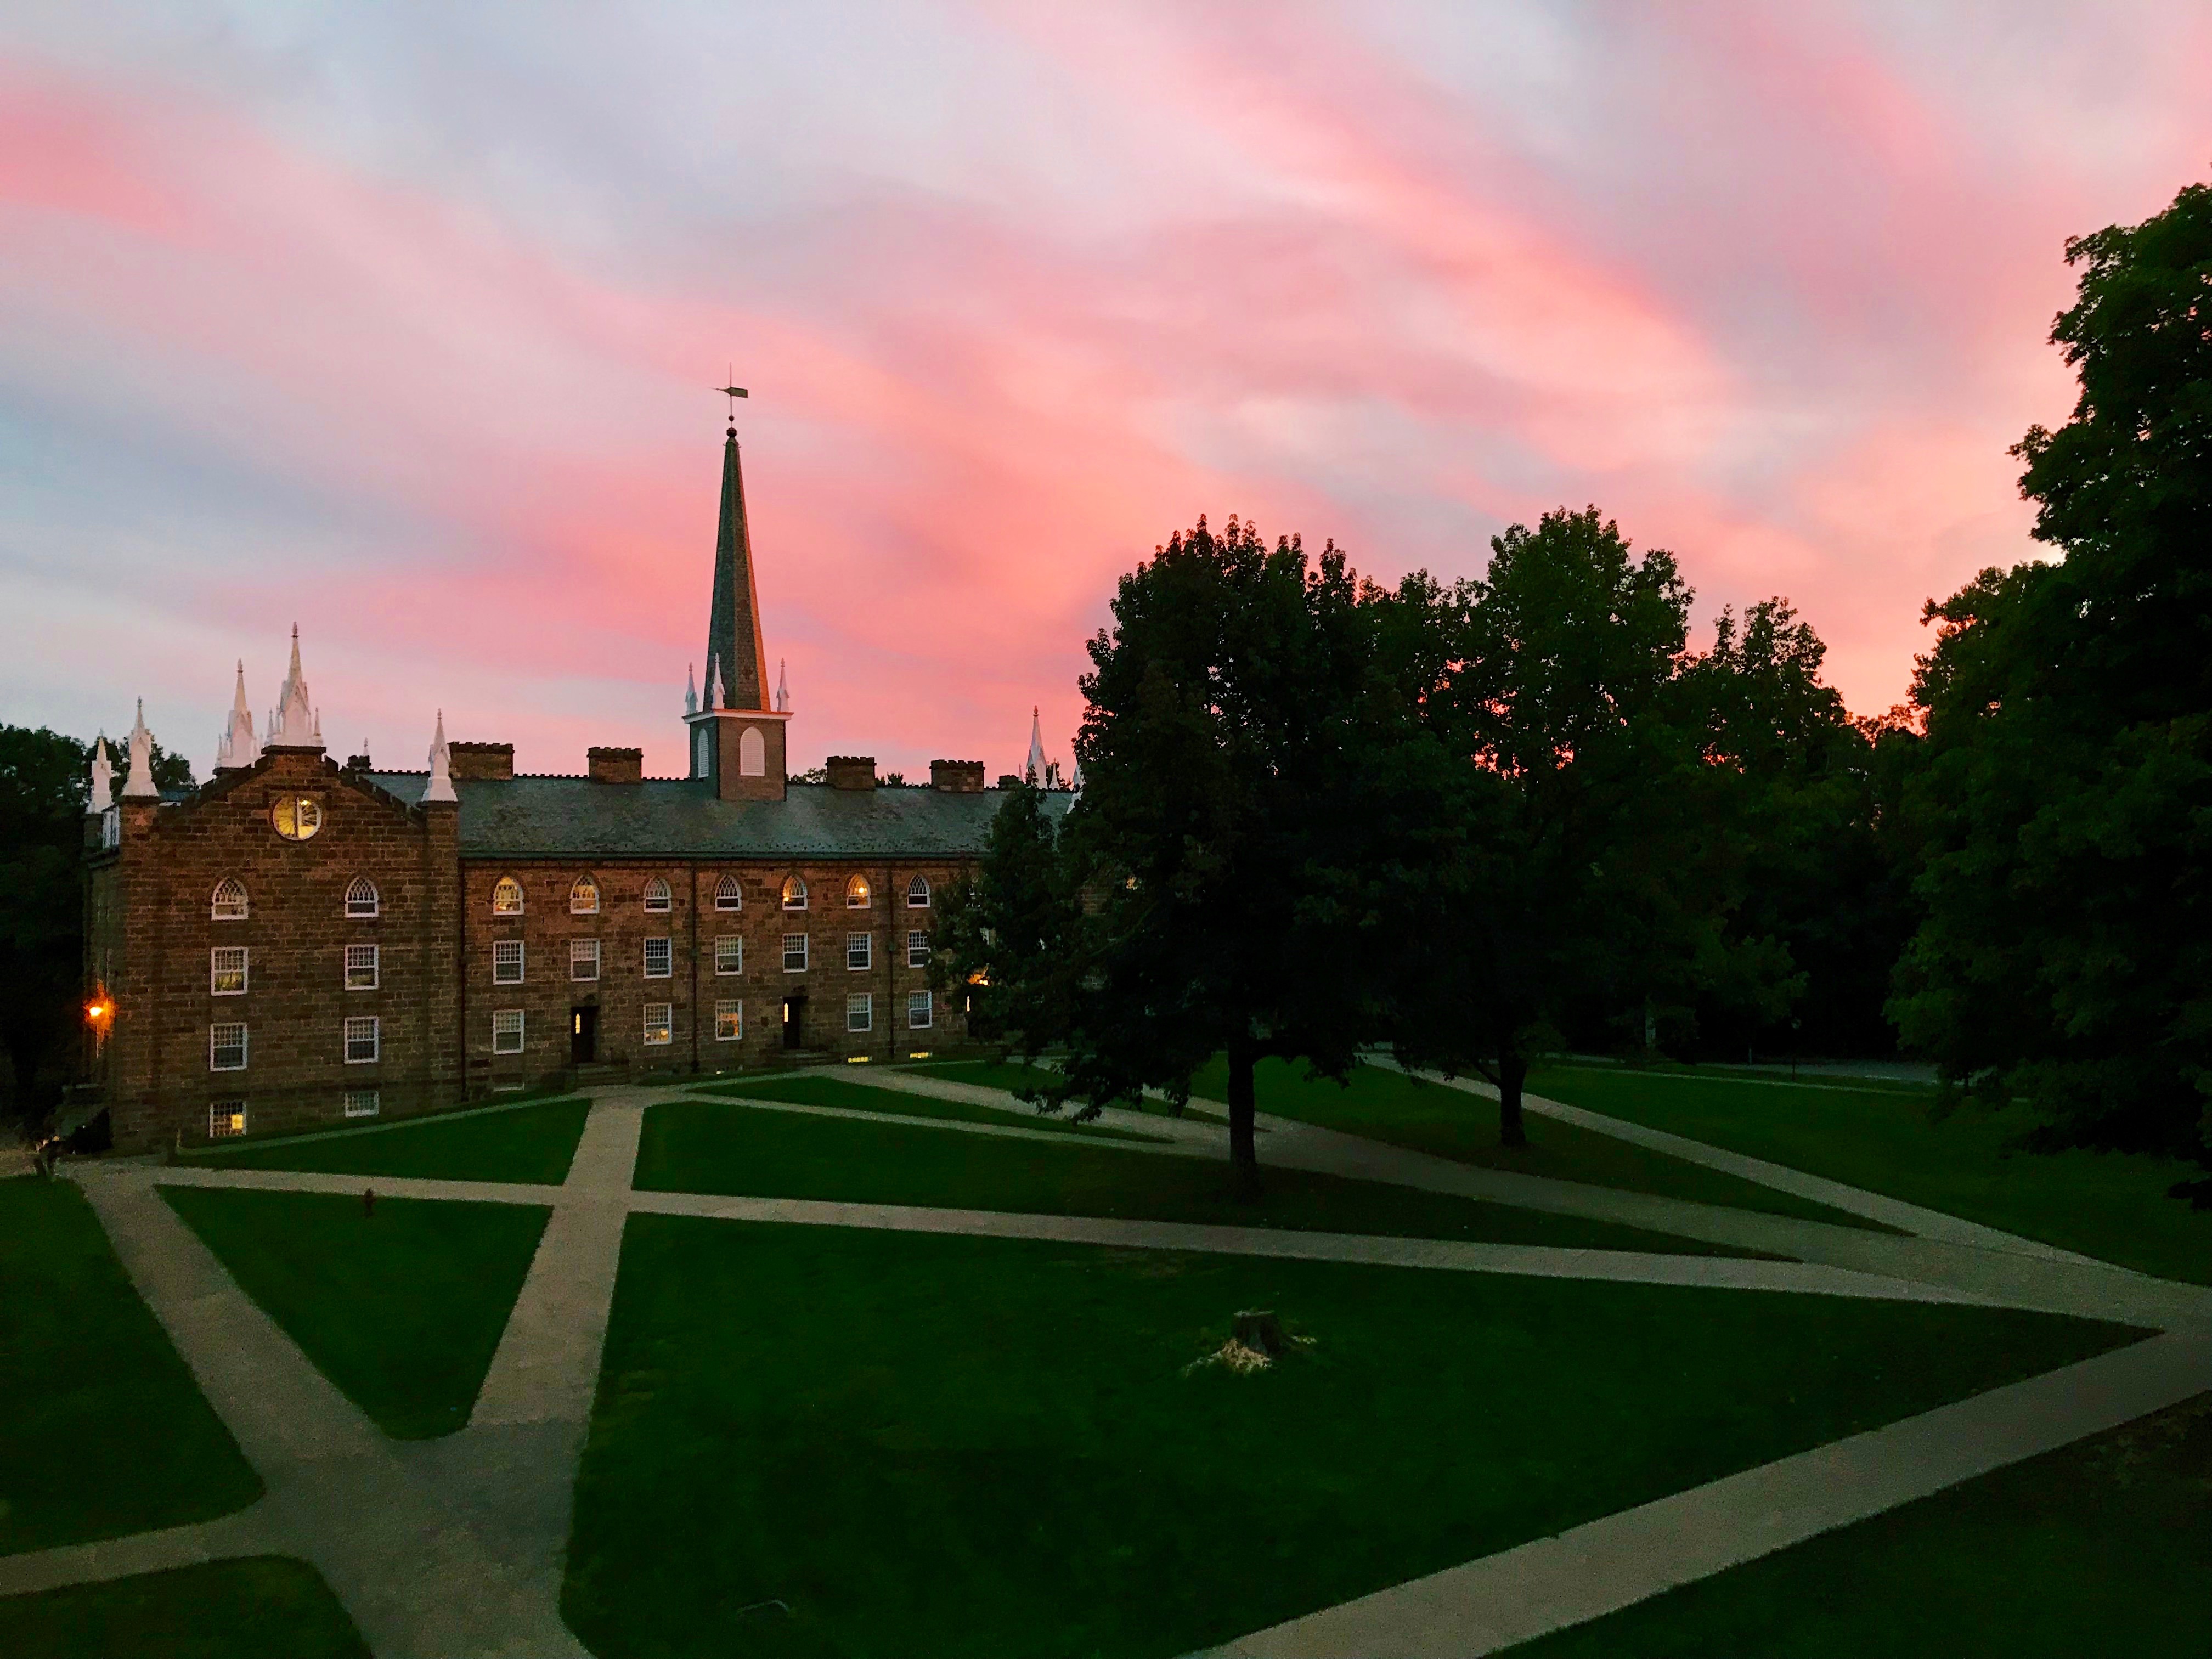 A photo of Old Kenyon at sunset with a pink sky.